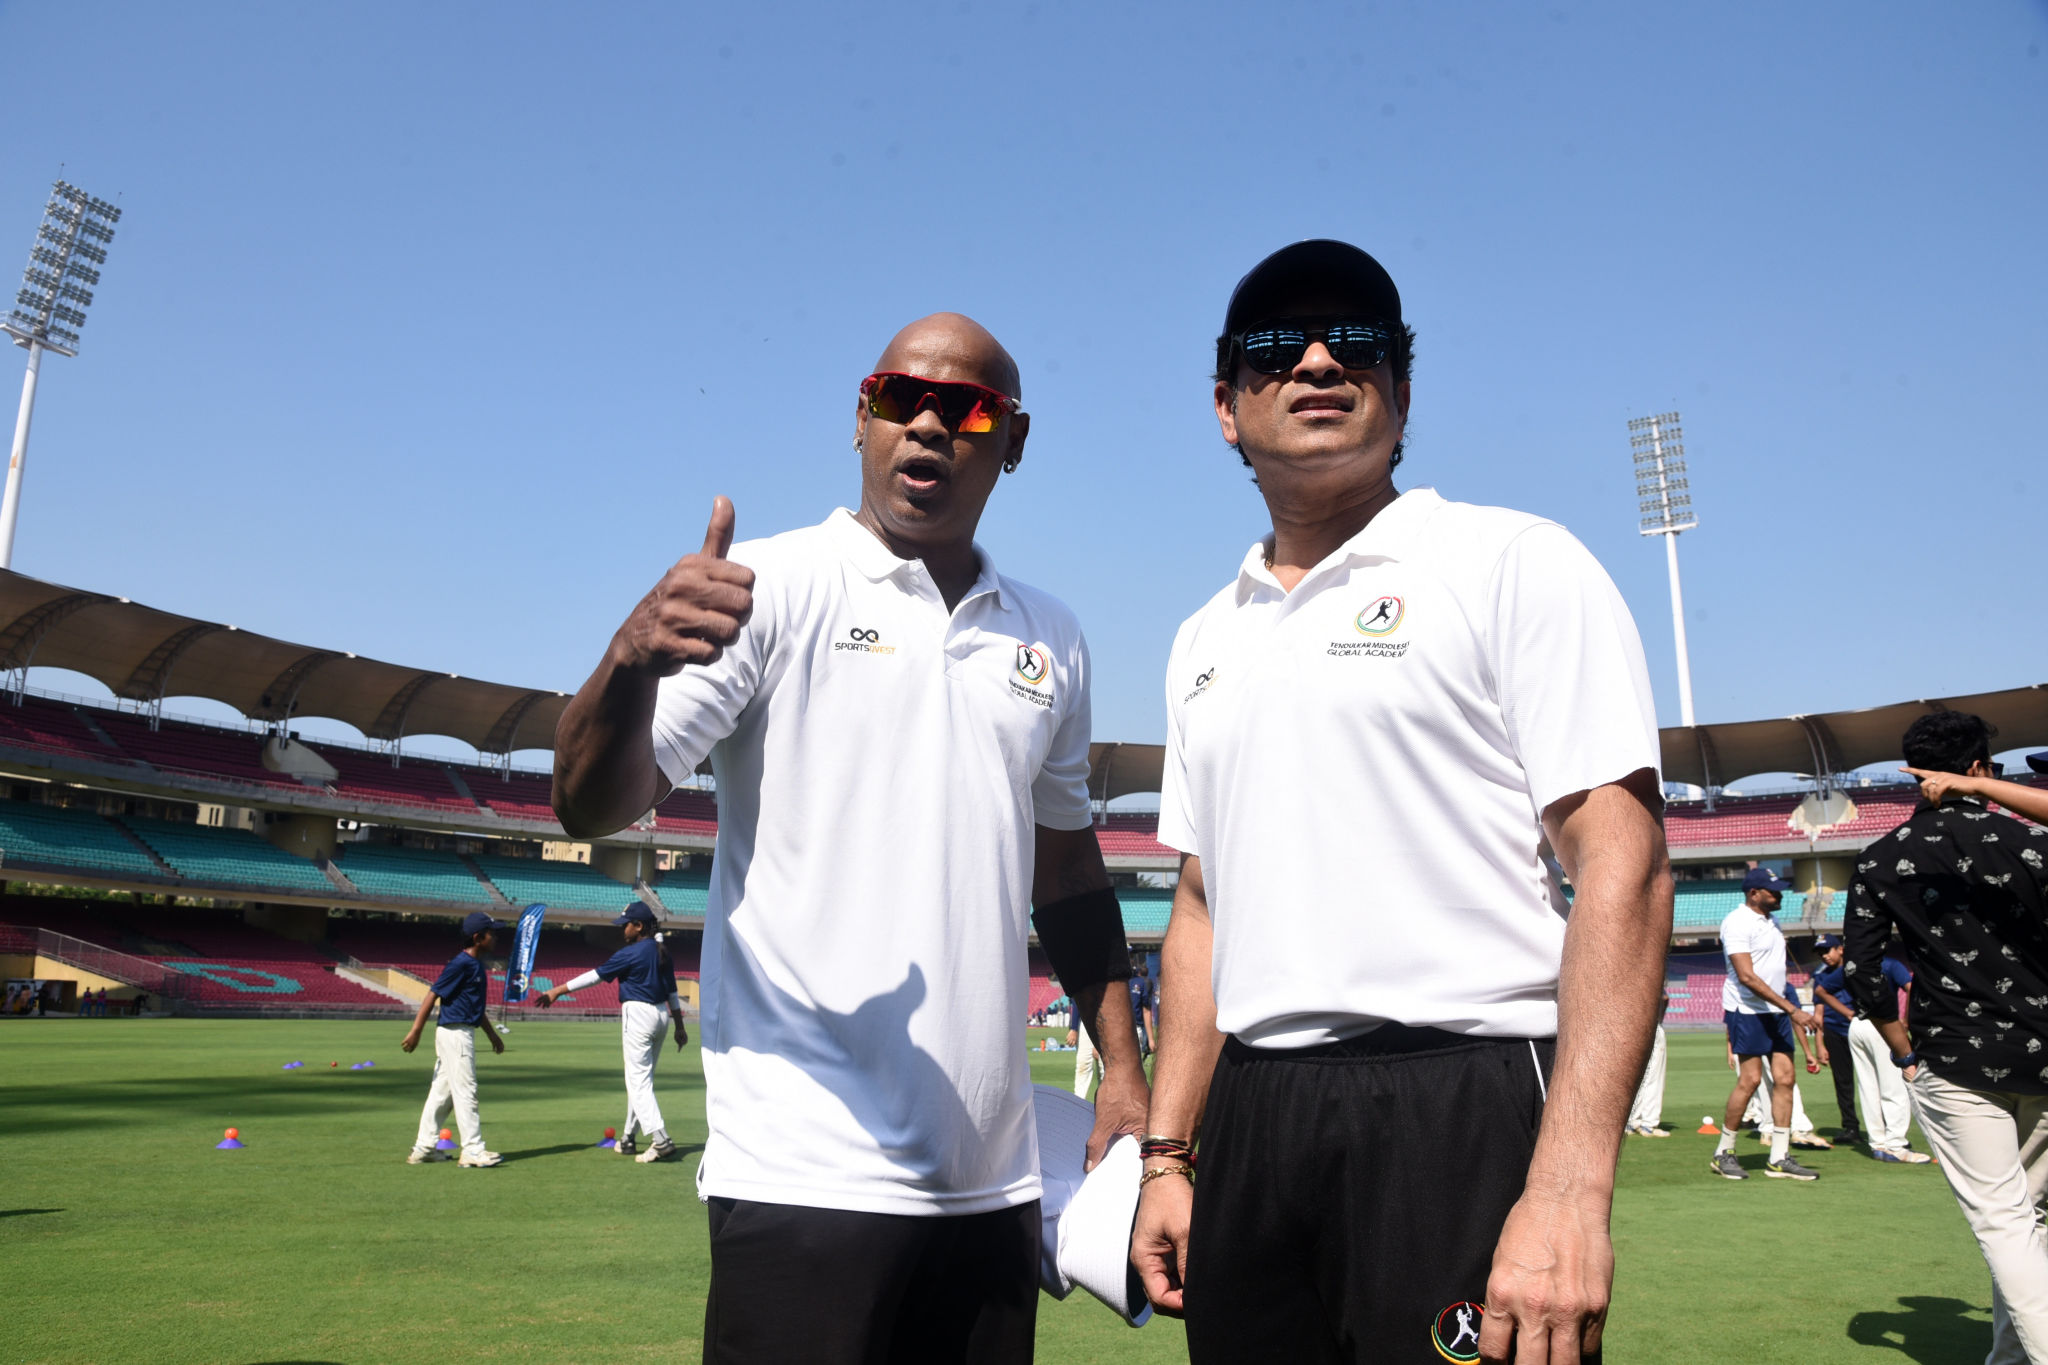 Vinod Kambli financial struggle: Ex- player Vinod Kambli OPENS up on financial problems, looking out for job to pay bills, says ‘I have family to look after’